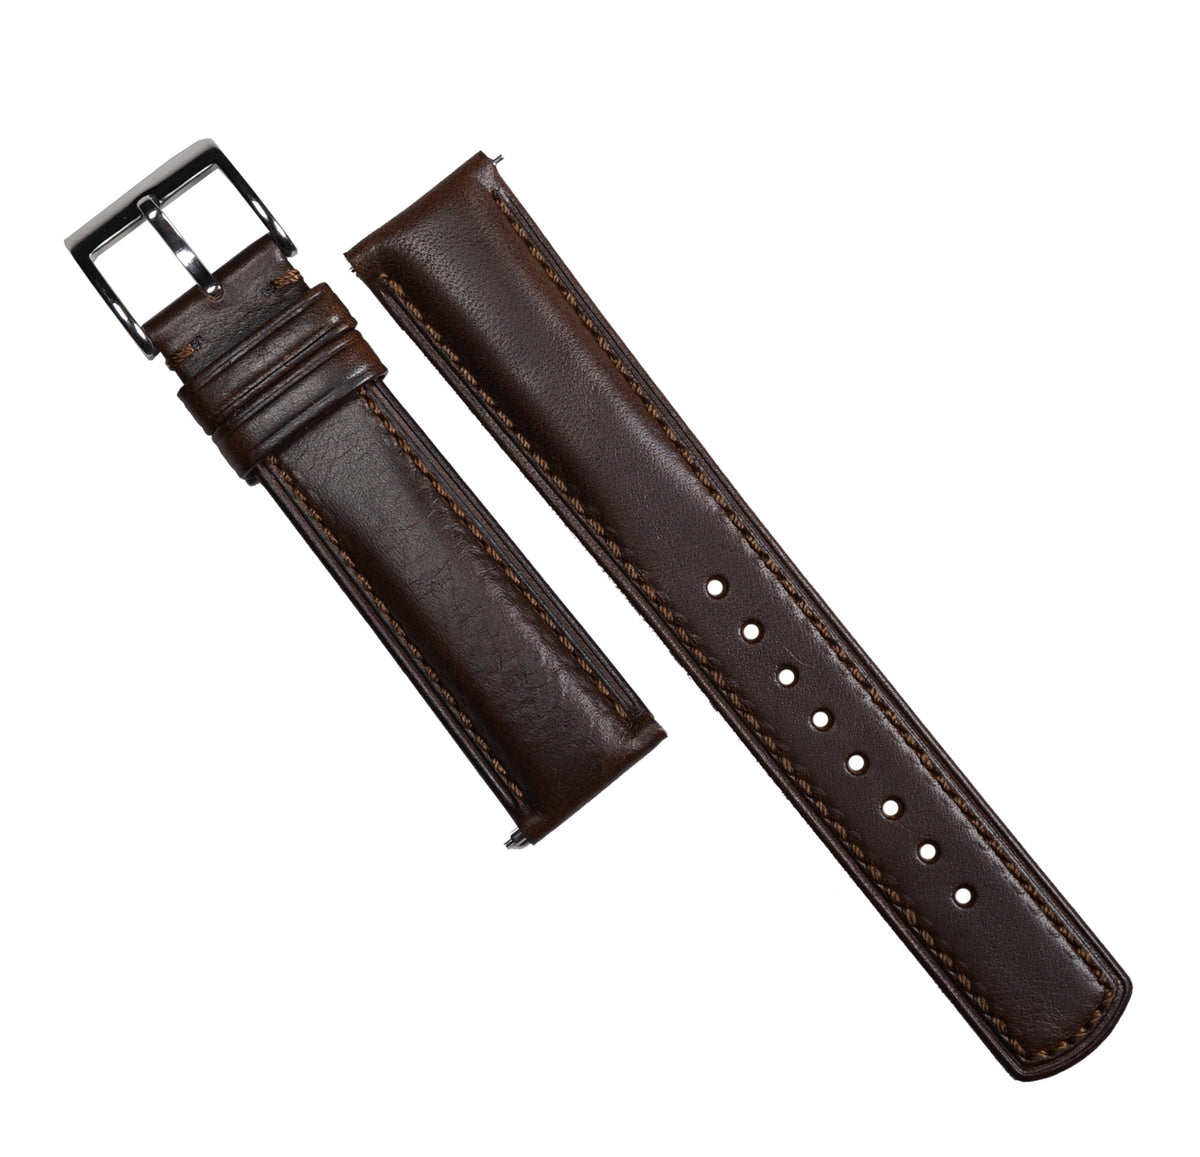 M3 Smooth Leather Watch Strap in Brown - Nomad Watch Works SG